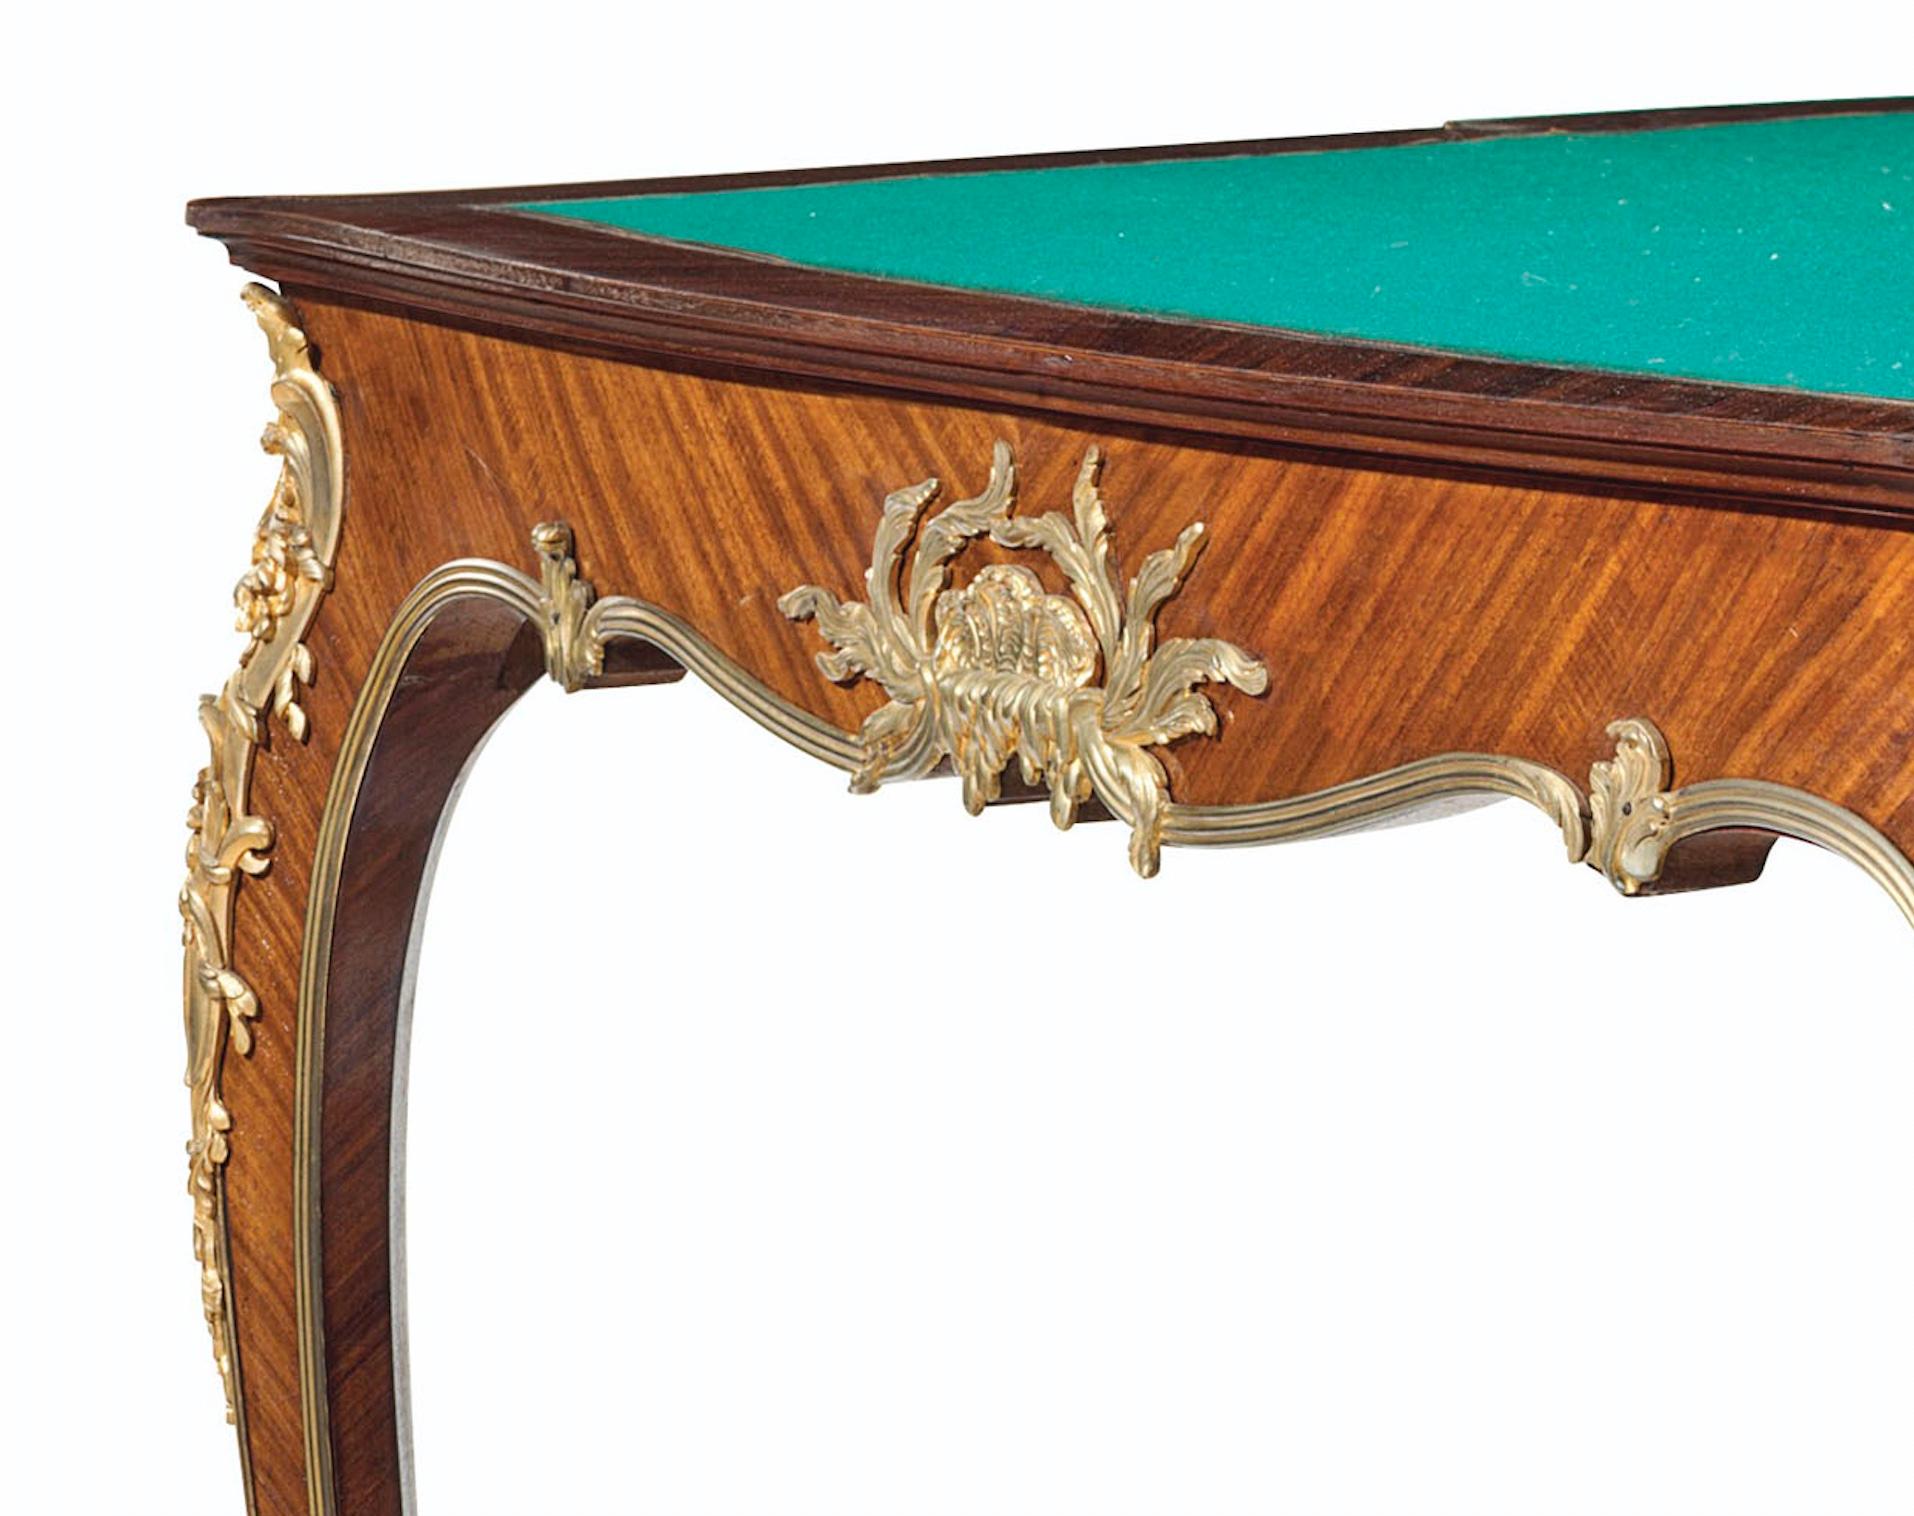 Late 19th Century French Ormolu-Mounted Kingwood and Satin Parquetry Games Table For Sale 1